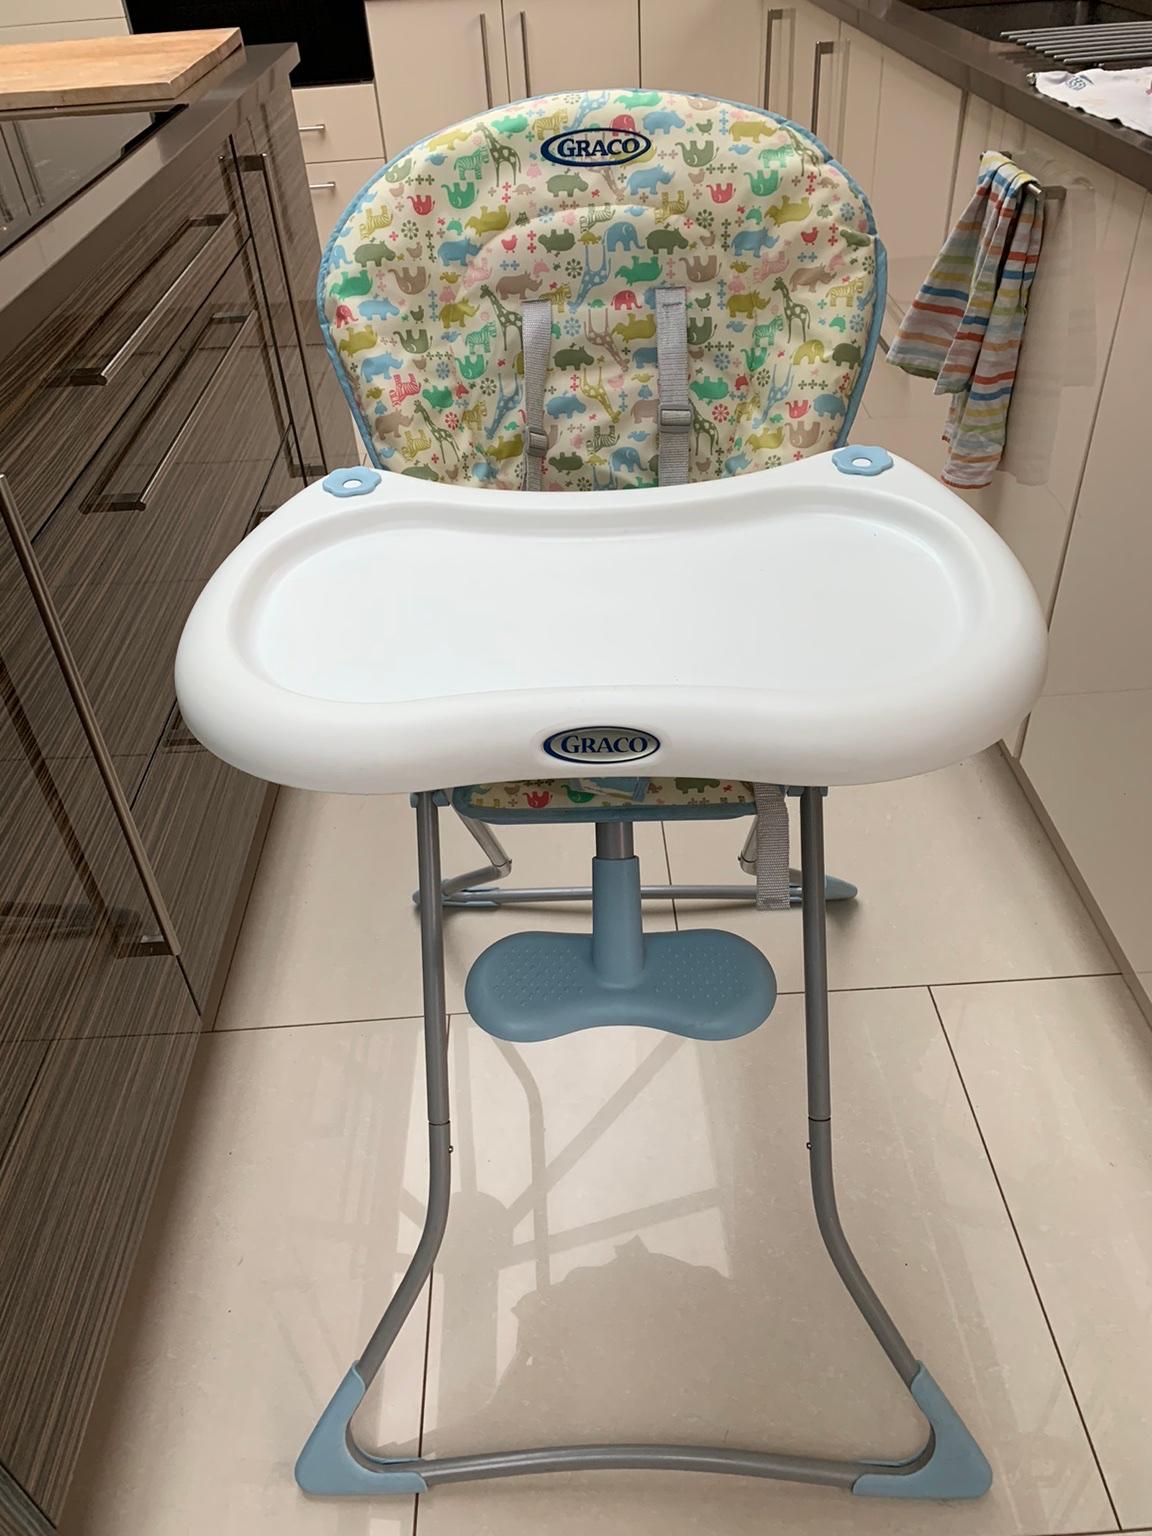 High Chair Graco In B44 Walsall For 14 00 For Sale Shpock